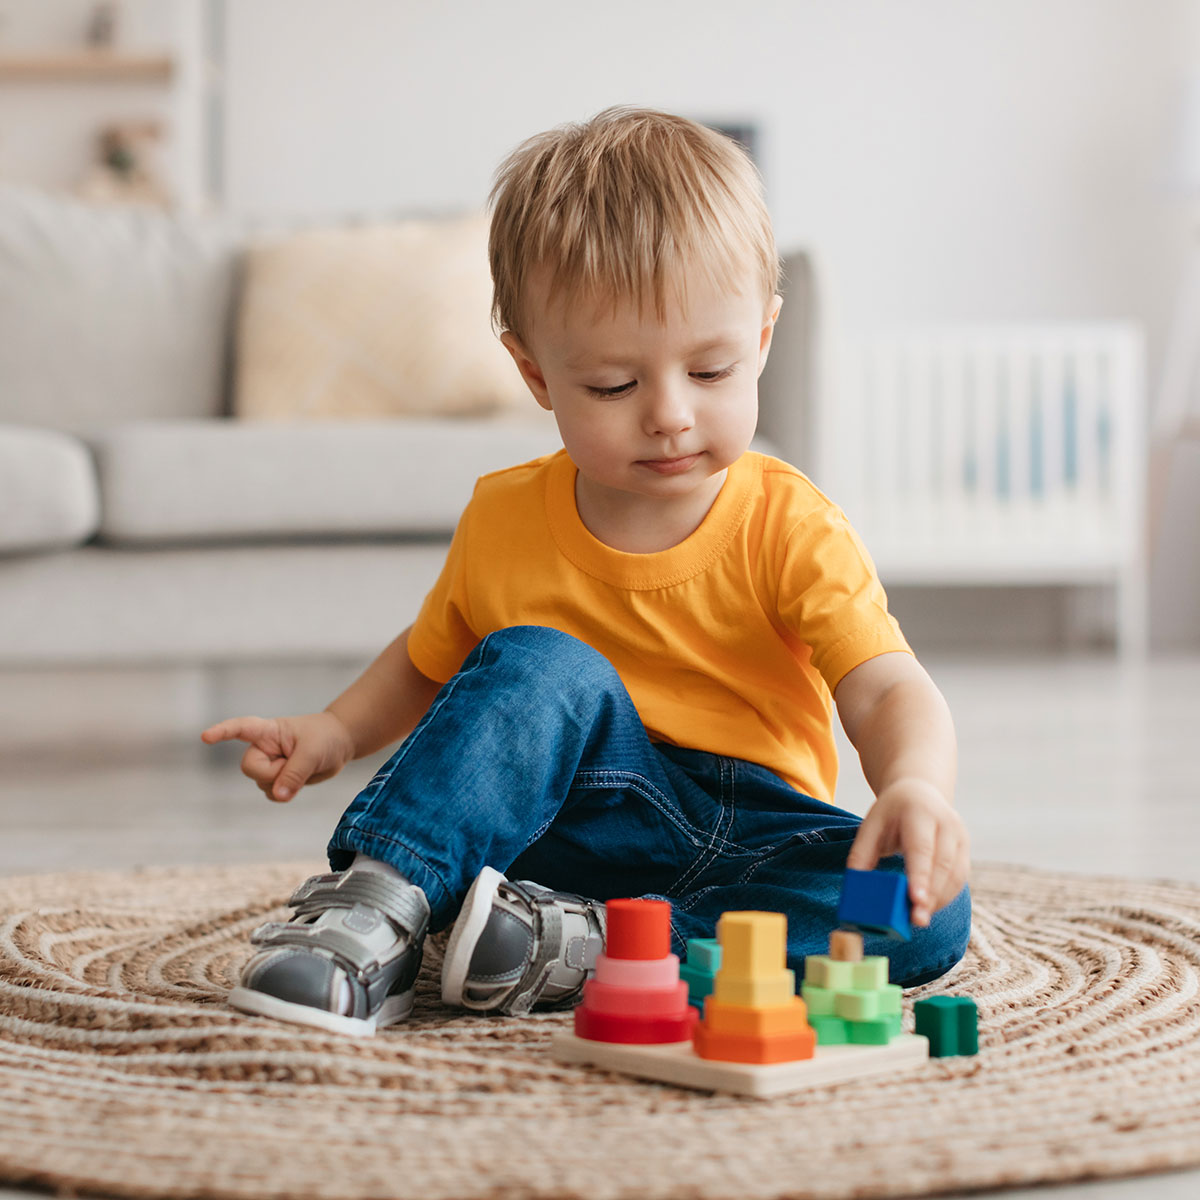 Early development concept. Little toddler boy playing with educational wooden toy at home, sitting in living room interior, free space. Child with wooden colorful stacking and sorting toy